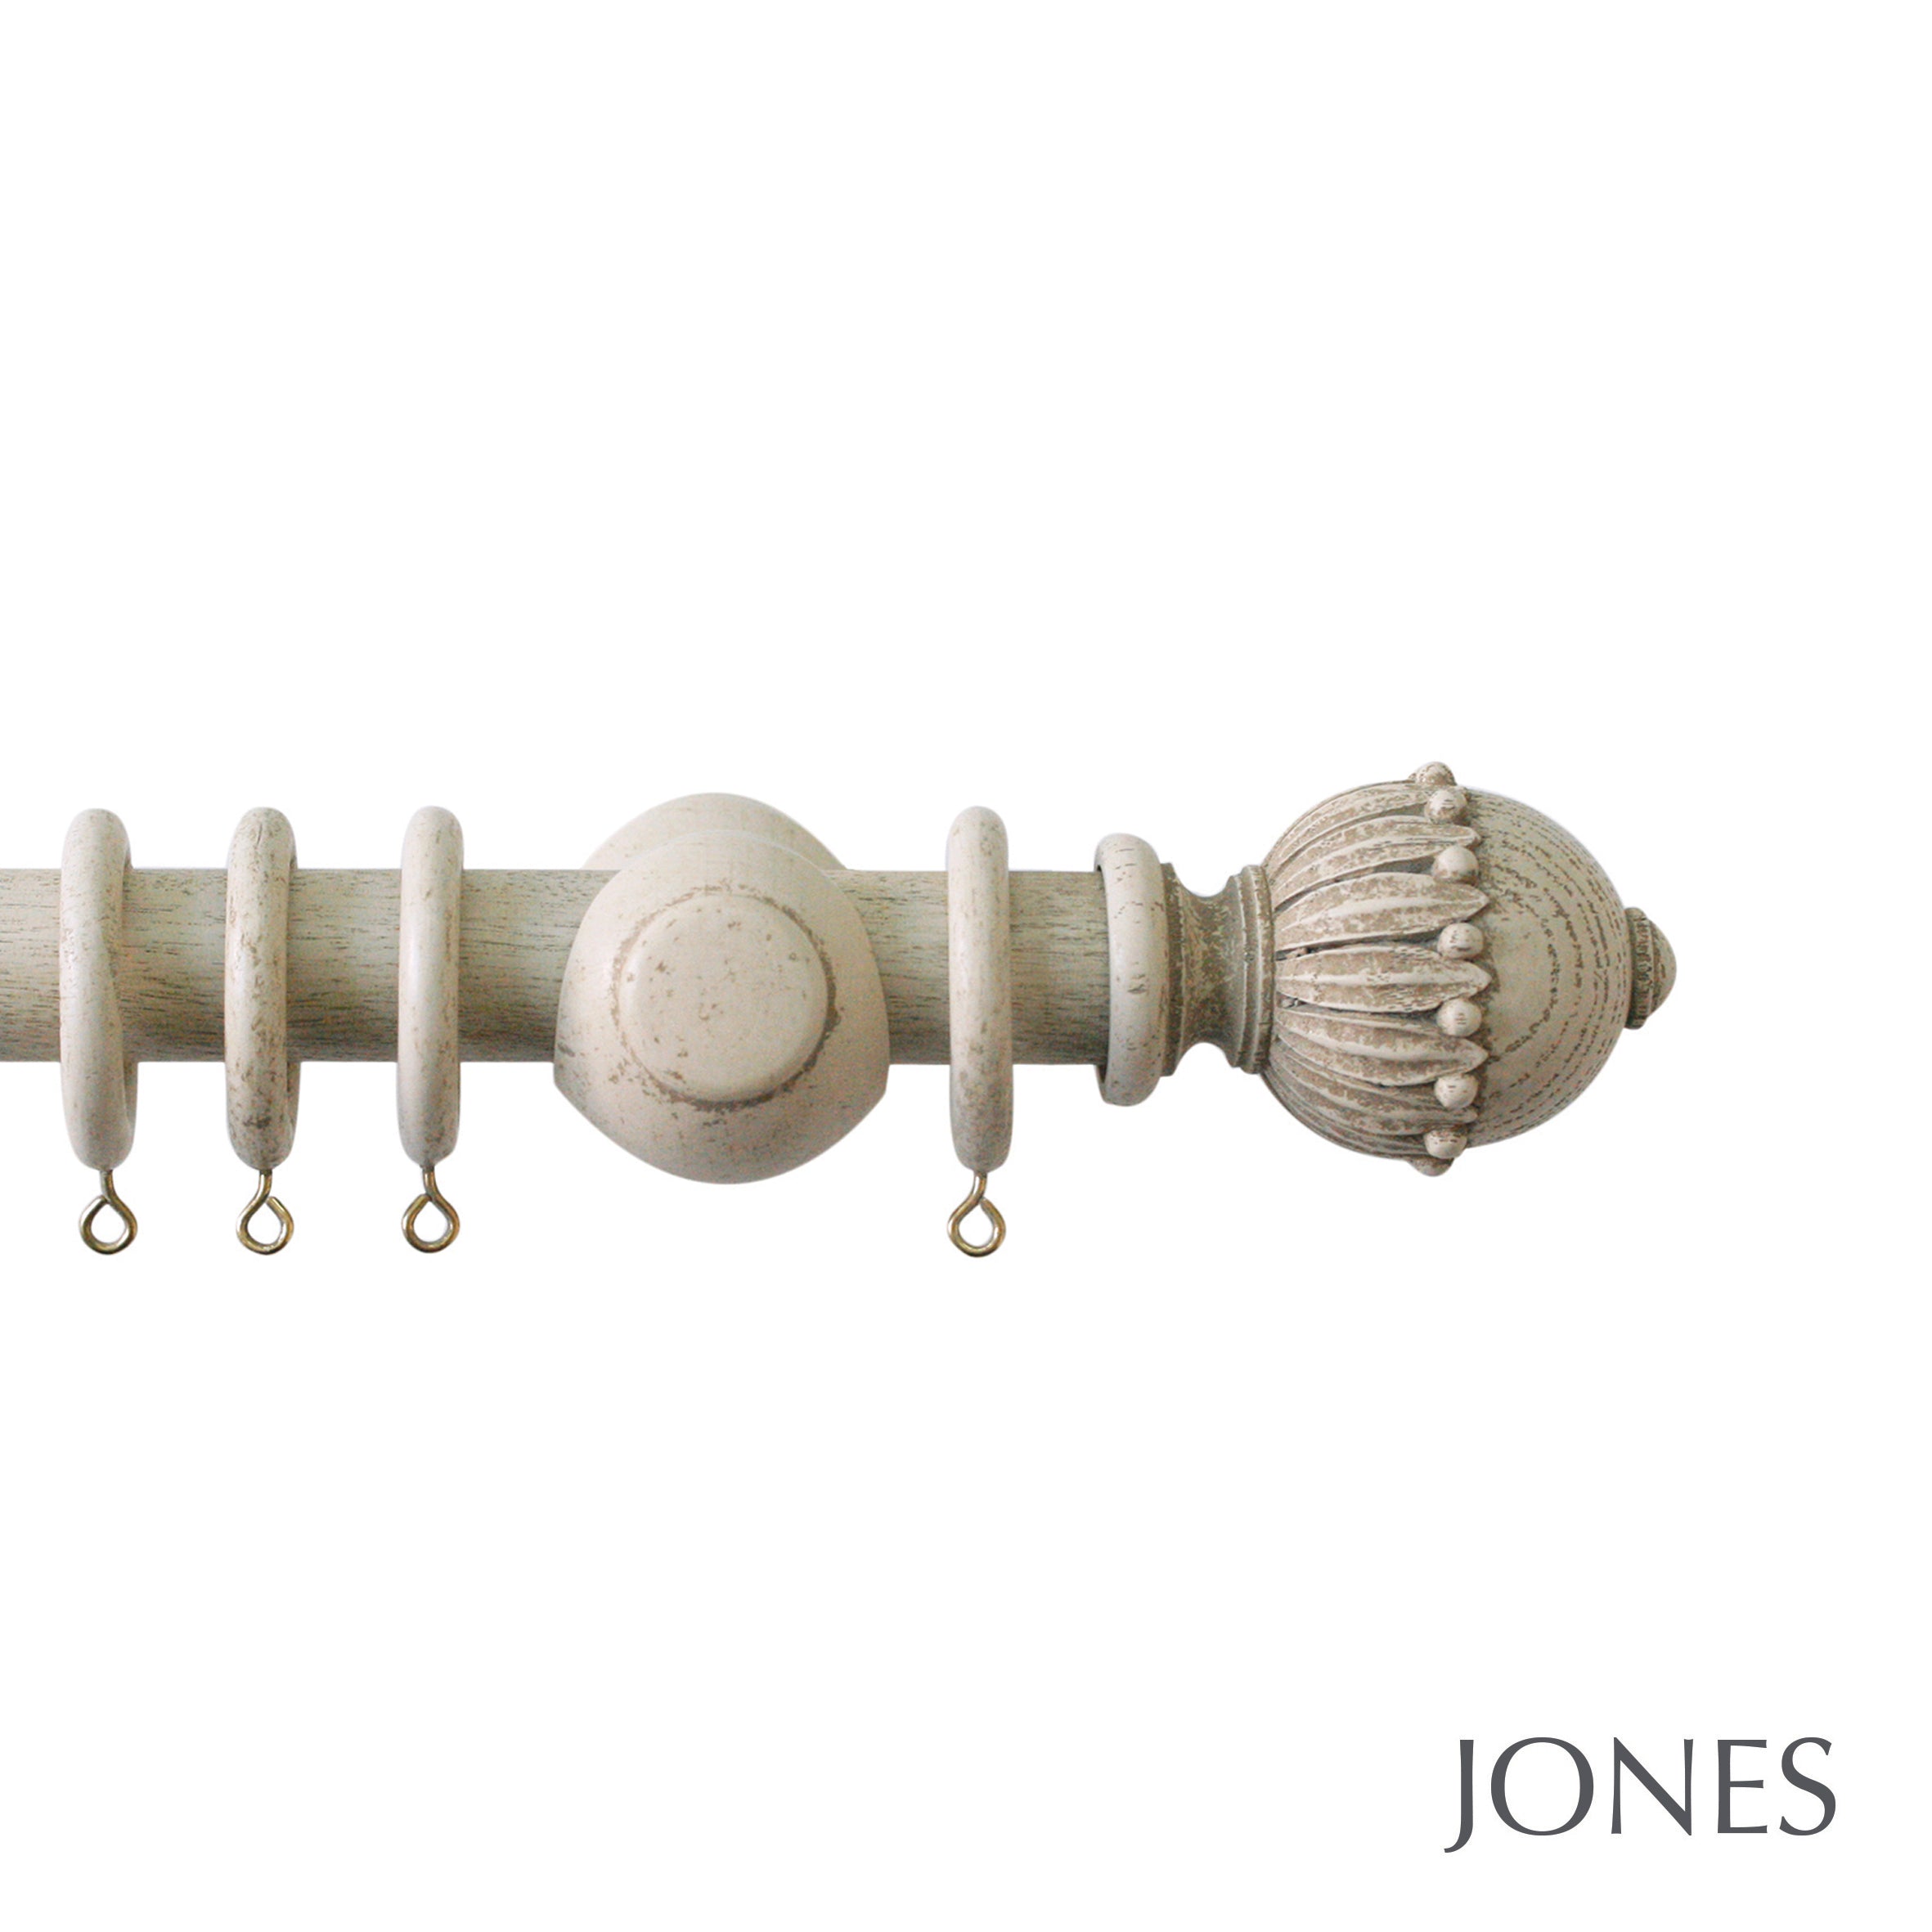 Jones Interiors Cathedral Wells Finial Curtain Pole Set in Putty